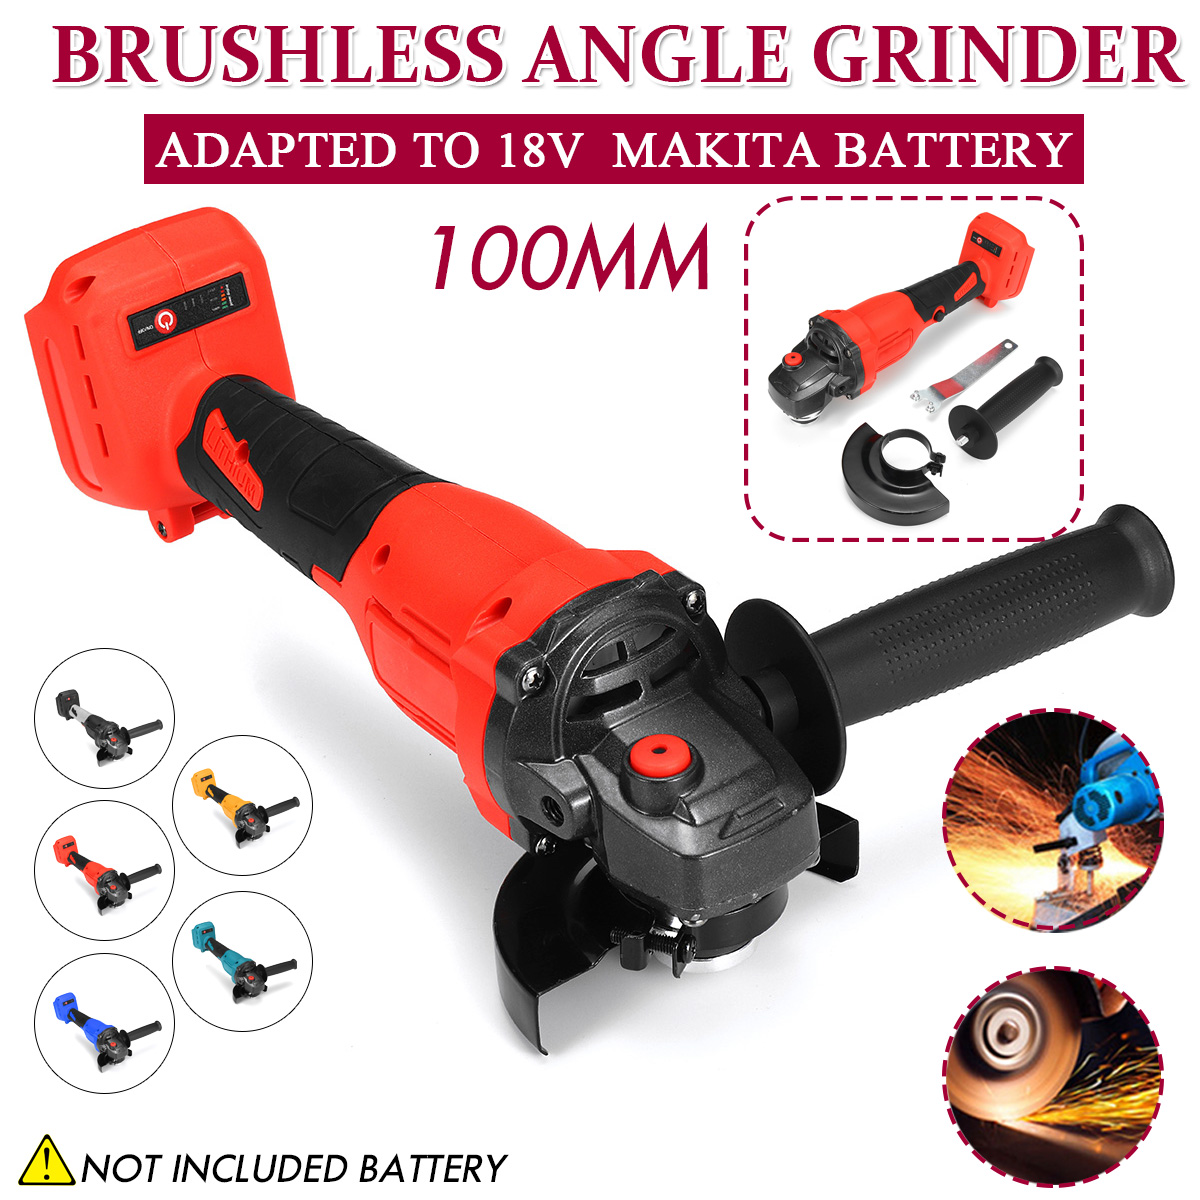 FASGet-800W-100mm-Electric-Angle-Grinder-Cordless-Brushless-Polishing-Machuine-Cut-Off-Tool-For-Maki-1740114-2